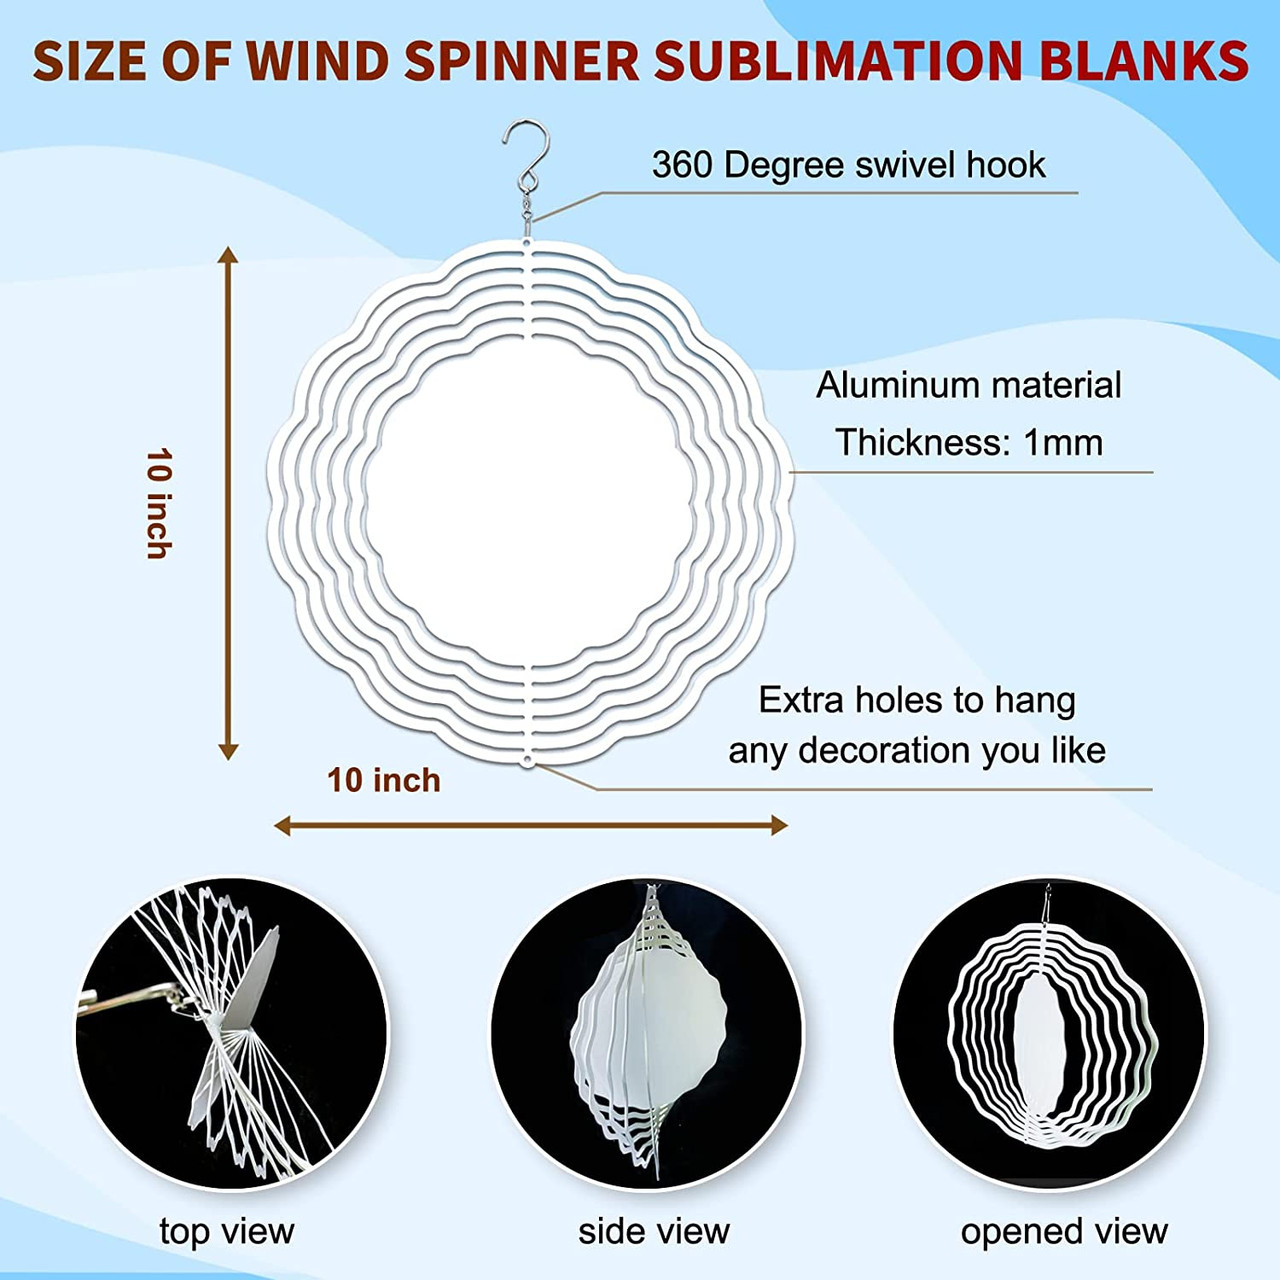 Wholesale Pewter Metal Sublimation Wind Spinner Blanks 10, 8, And 10 Sizes  For Indoor/Outdoor Garden Decoration And Crafts From Belkin, $3.42